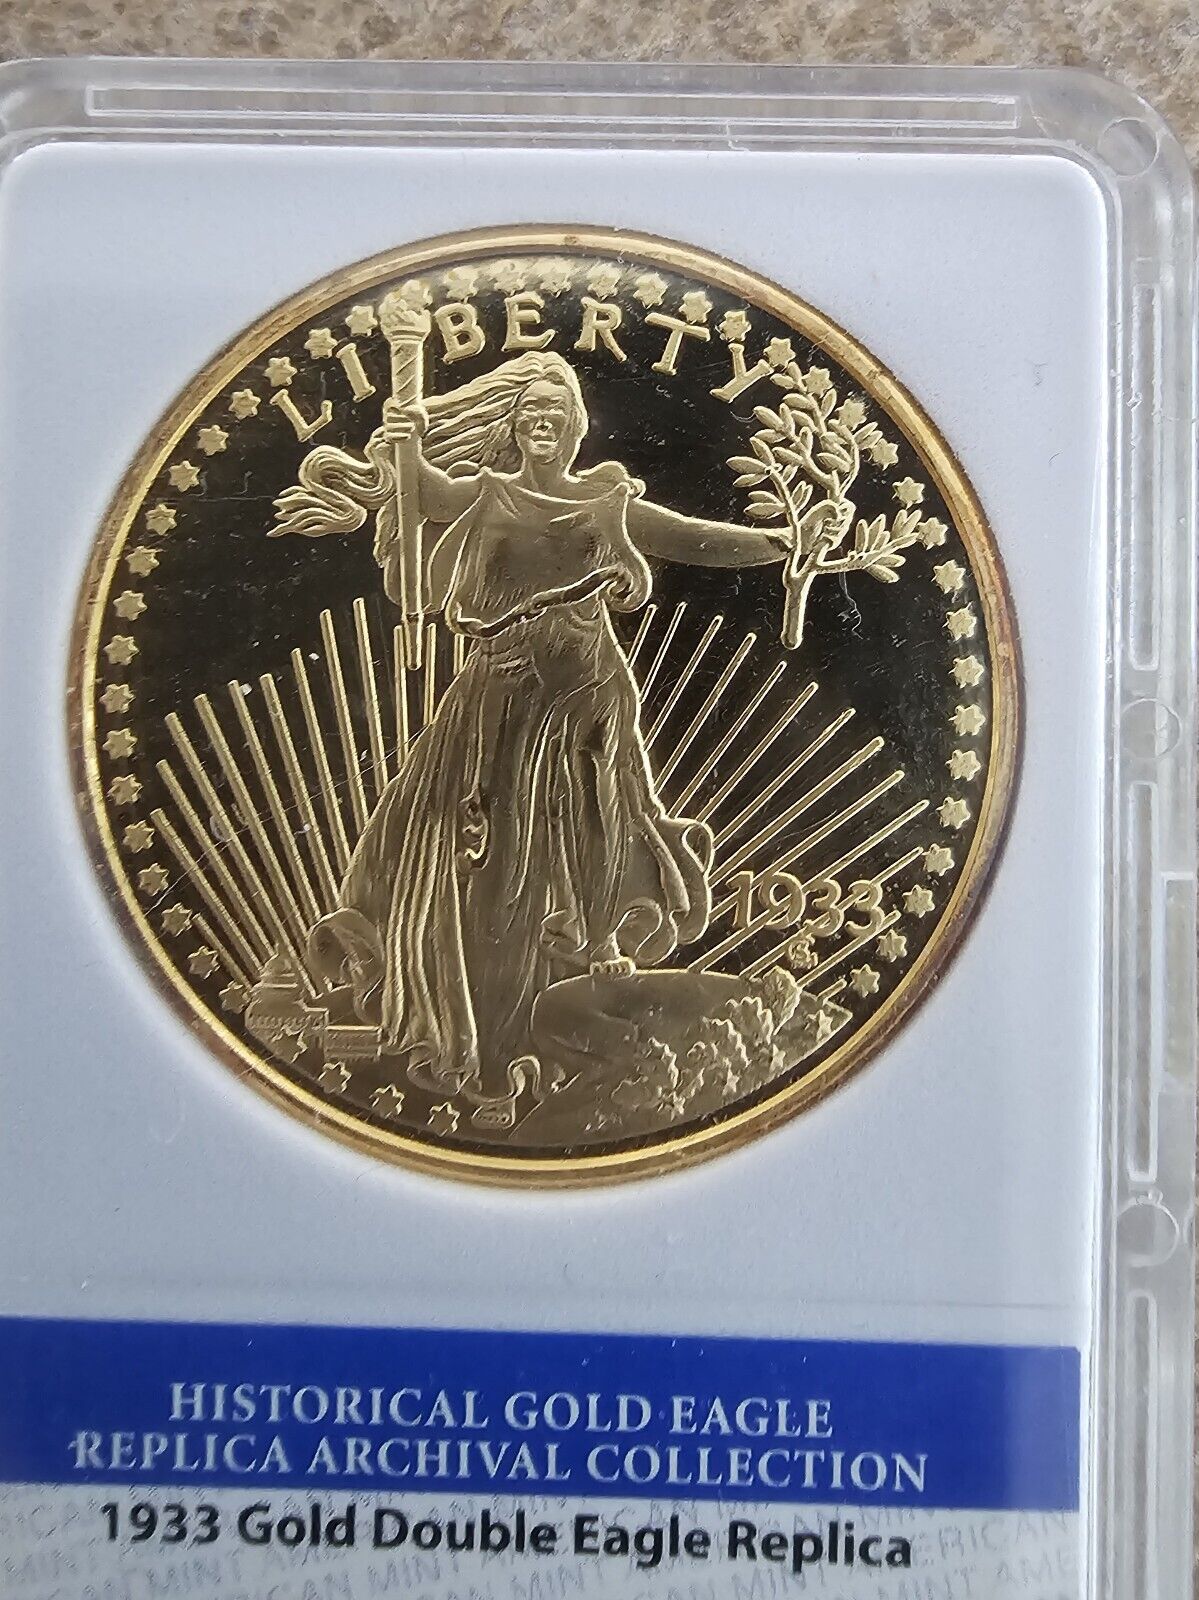 American Mint 1933 Saint-Gaudens Gold Double Eagle Replica Coin PROOF